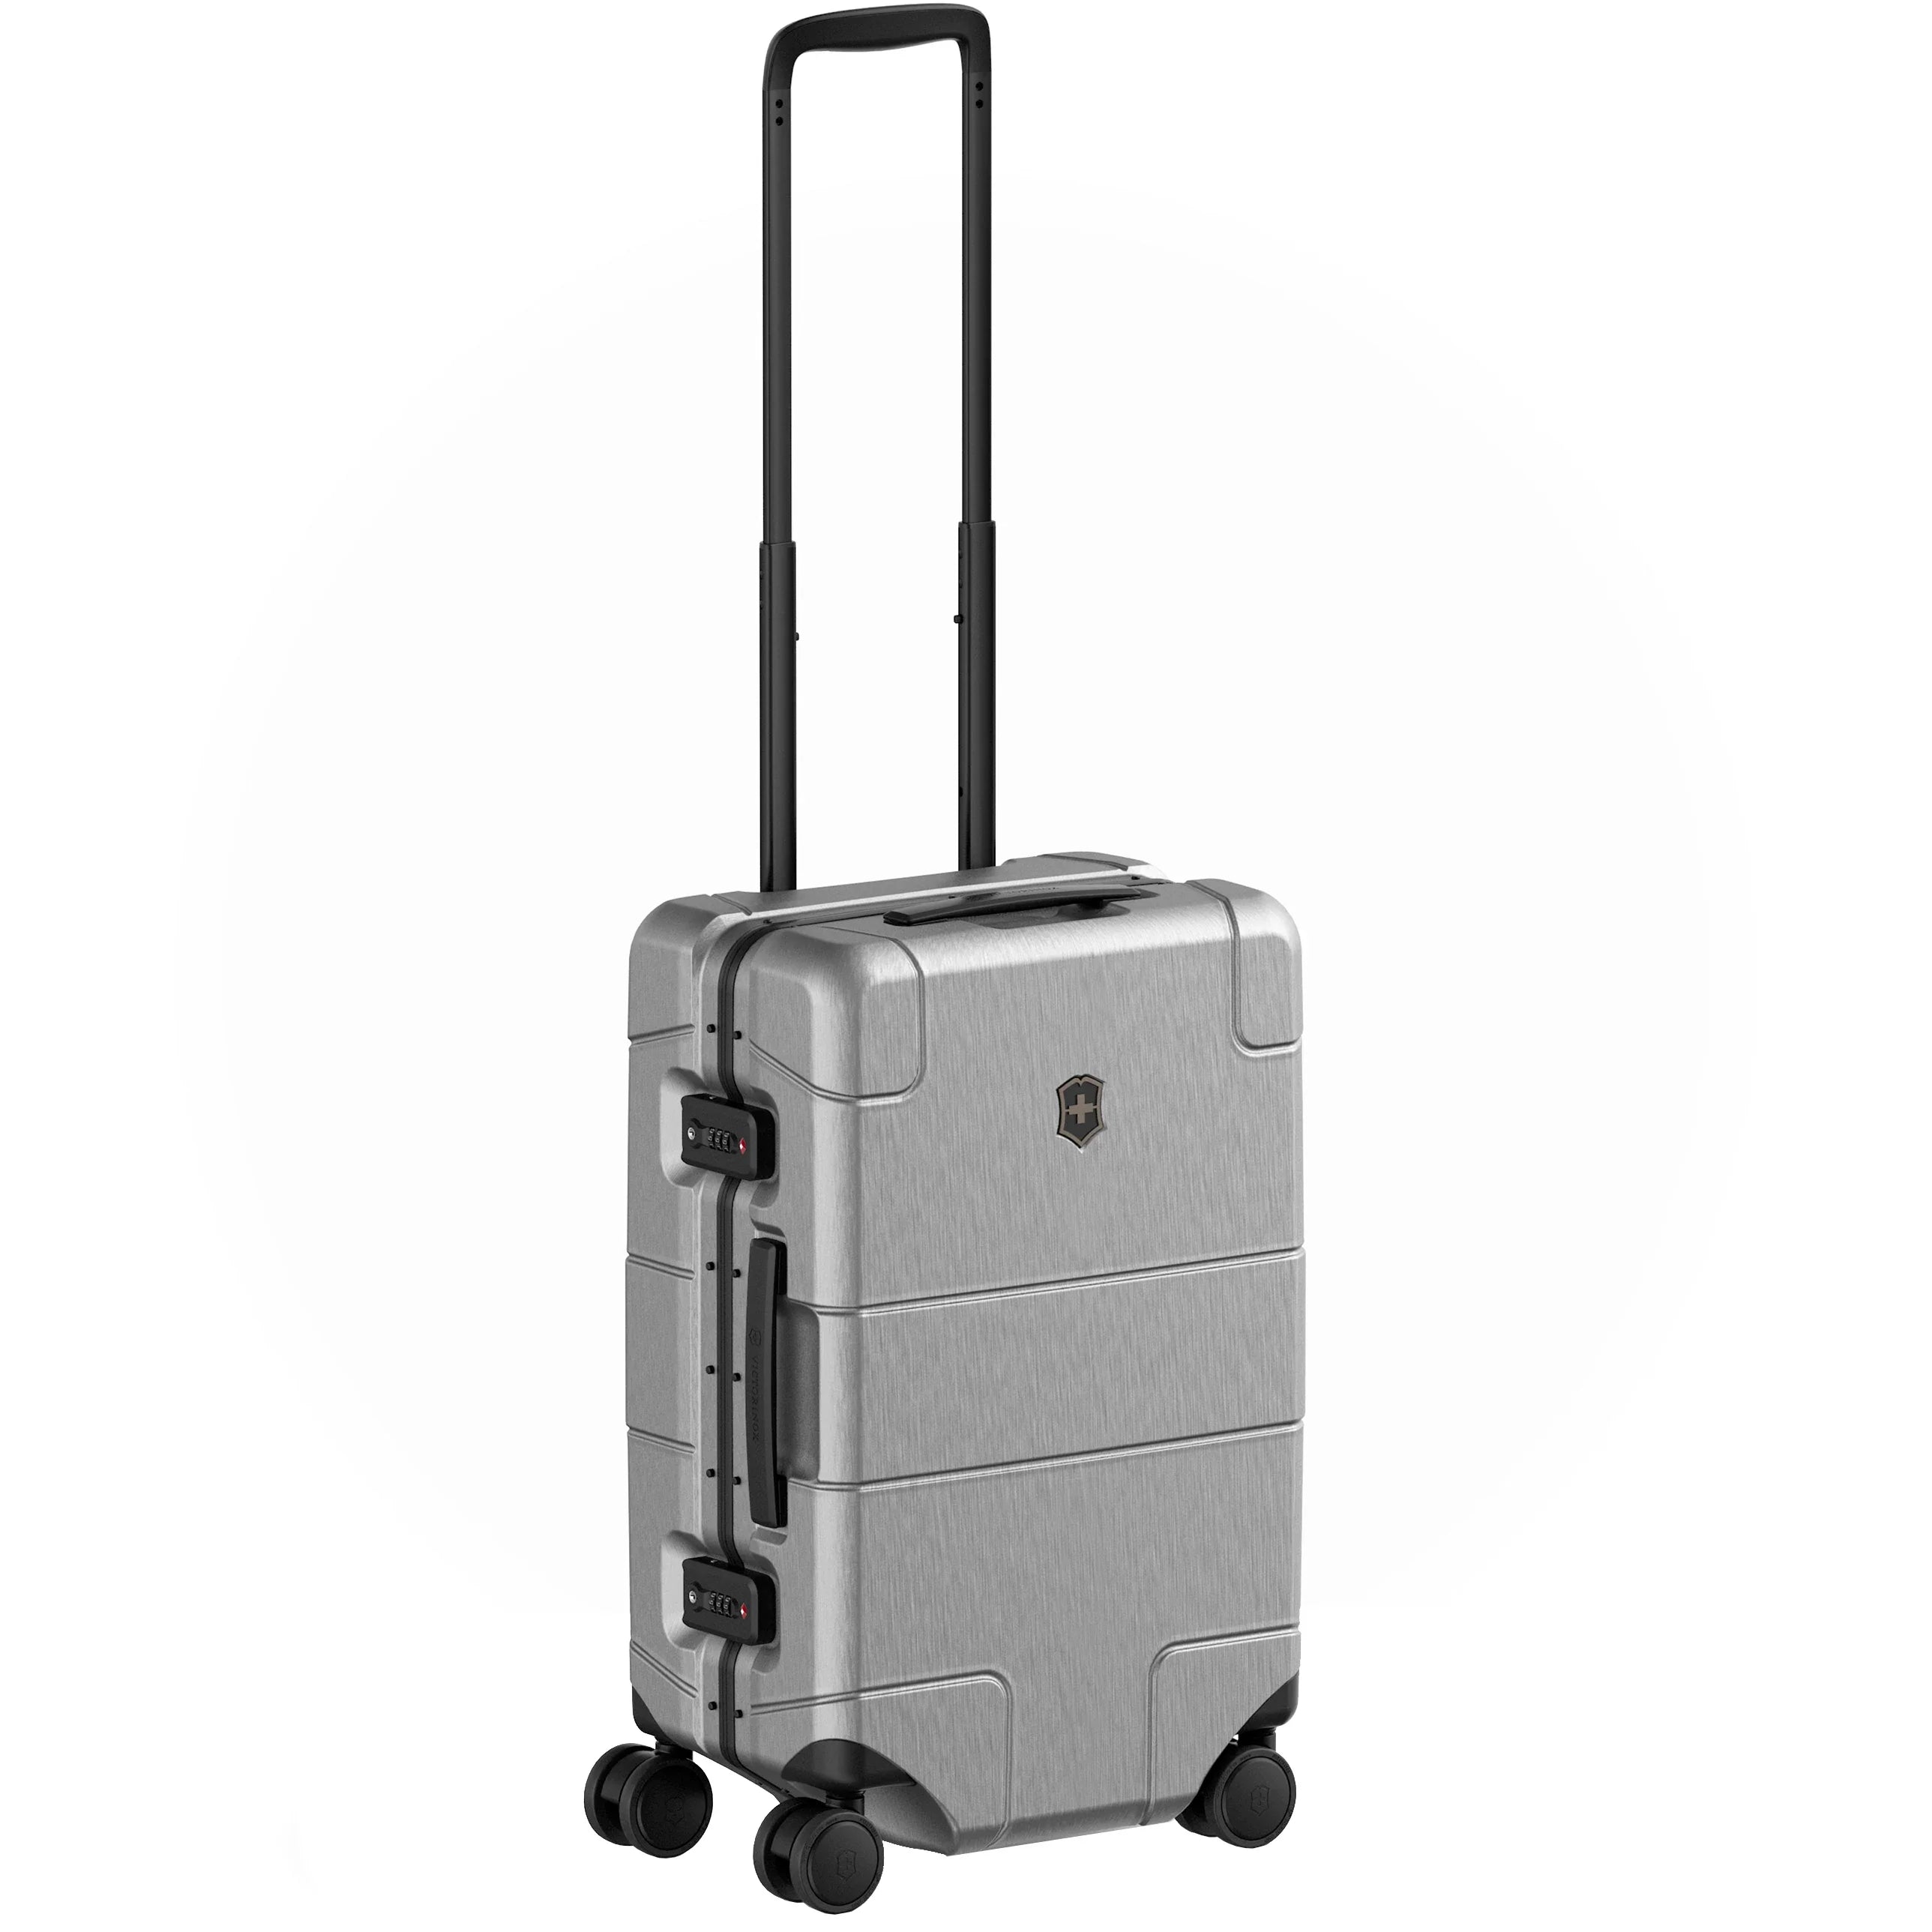 Victorinox Lexicon Framed Series Frequent Flyer Bagage à Main Rigide 55 cm - Argent